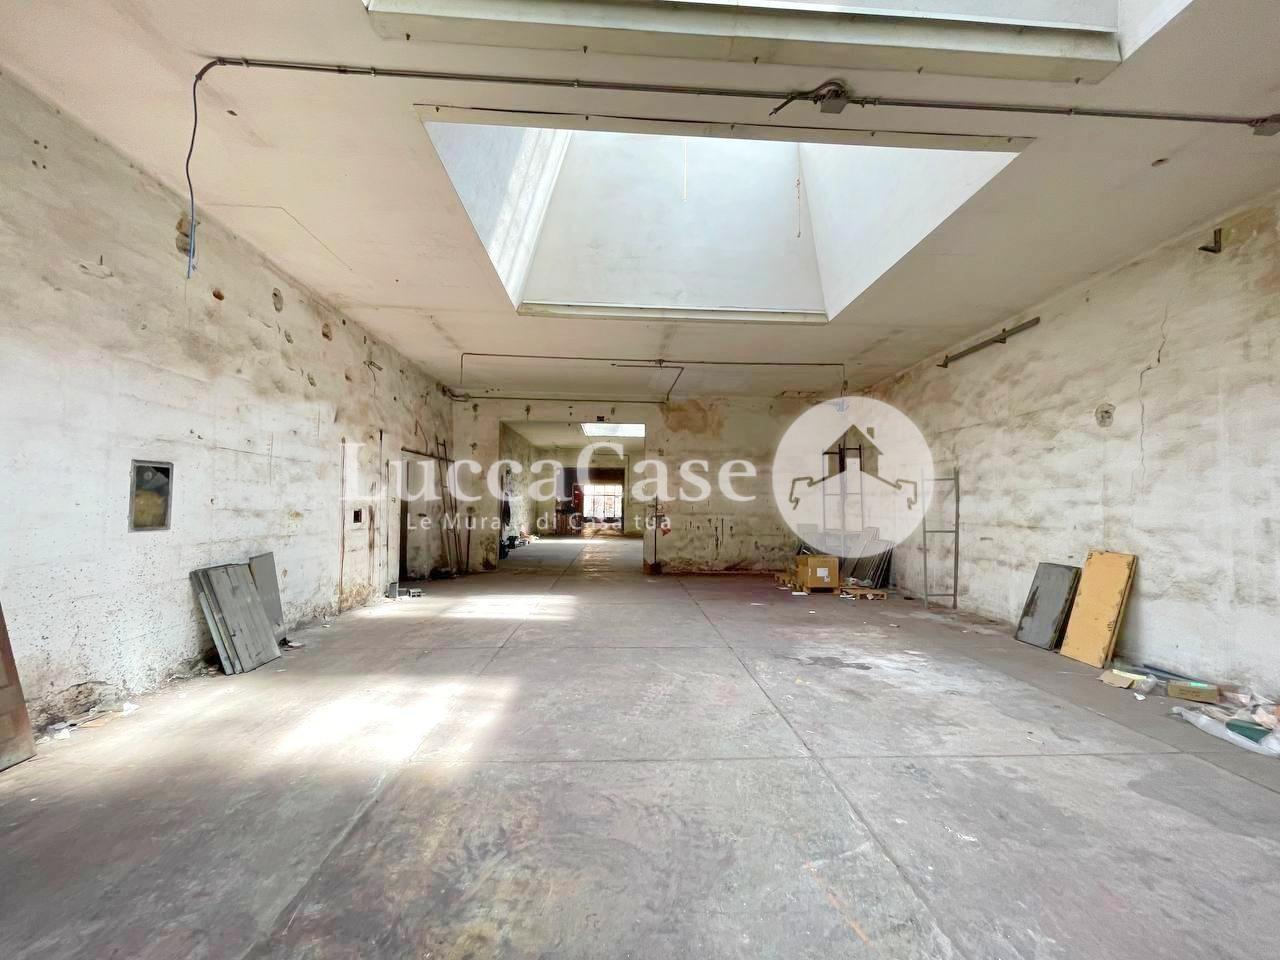 Warehouse for commercial rentals, ref. EF017P